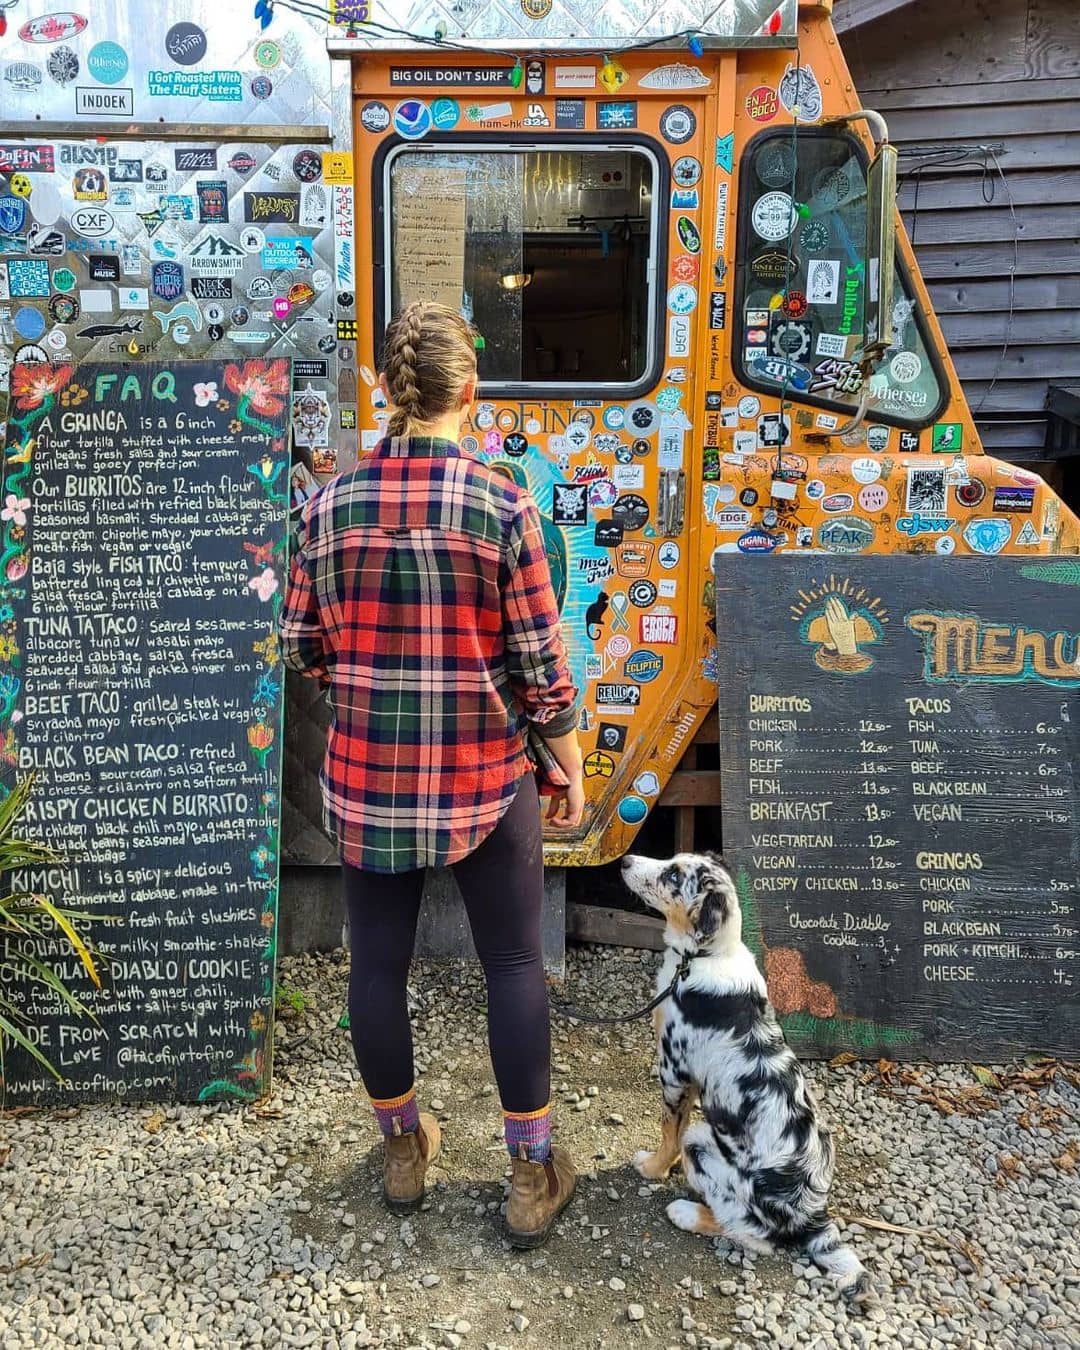 Places to Eat and Drink in Tofino - tacofino truck and woman and dog standing